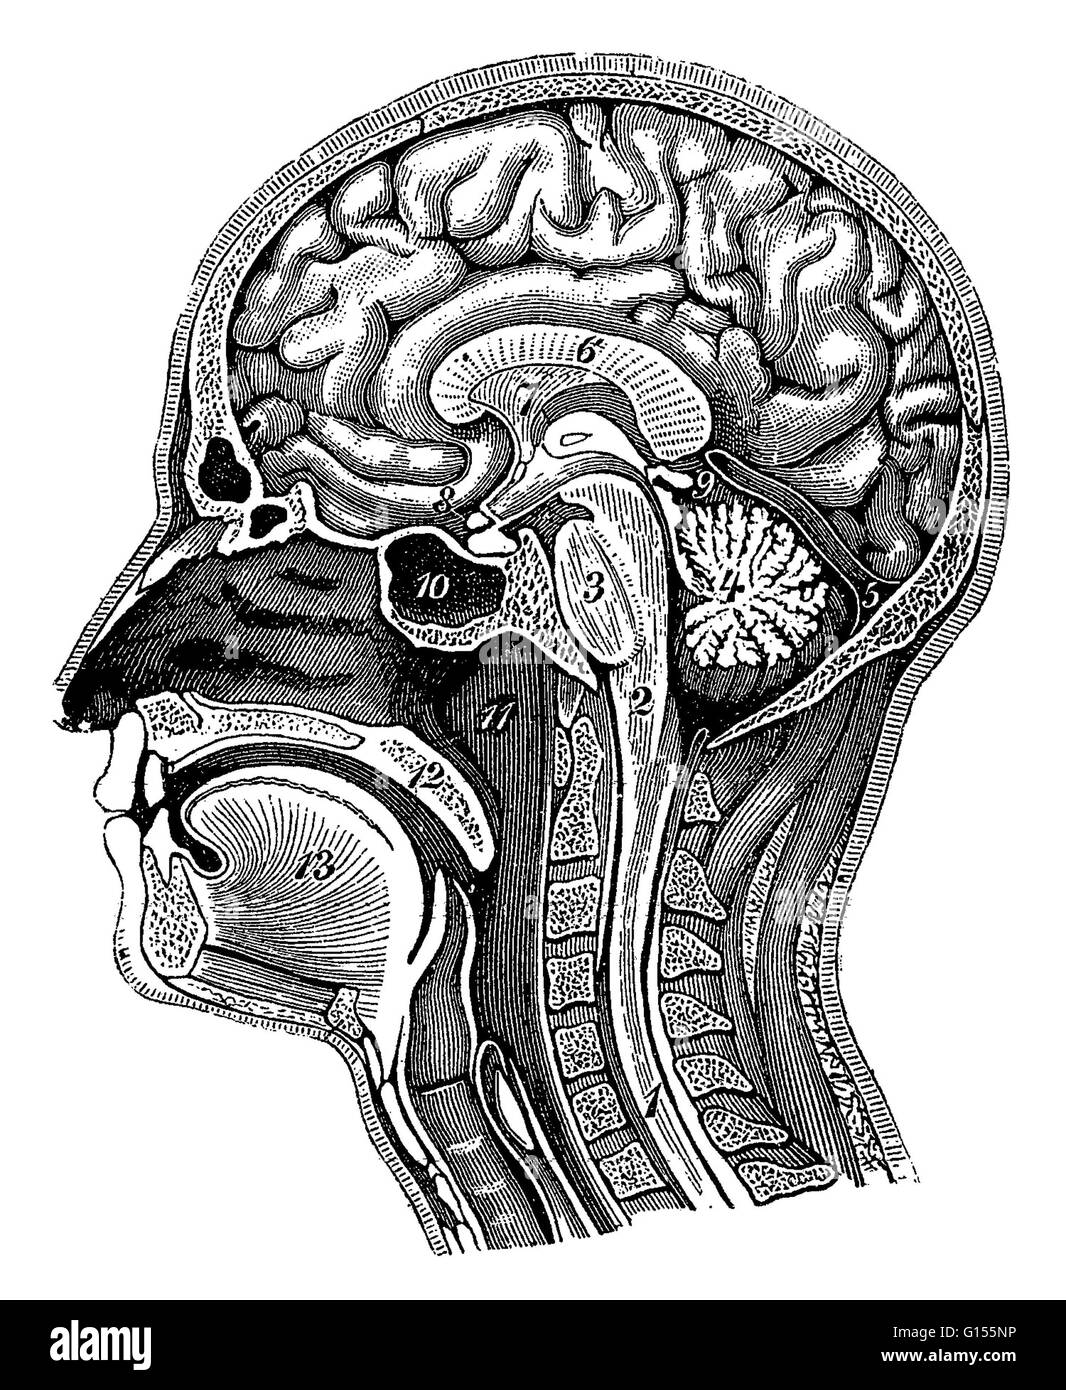 Illustration of a cross-section of the head showing the brain showing the spinal cord, medulla oblongata, pons, cerebellum, transverse fissure, corpus callosum, septum pellucidum, optic chiasm, pineal gland, sphenoid sinus, nasopharynx, soft palate and to Stock Photo